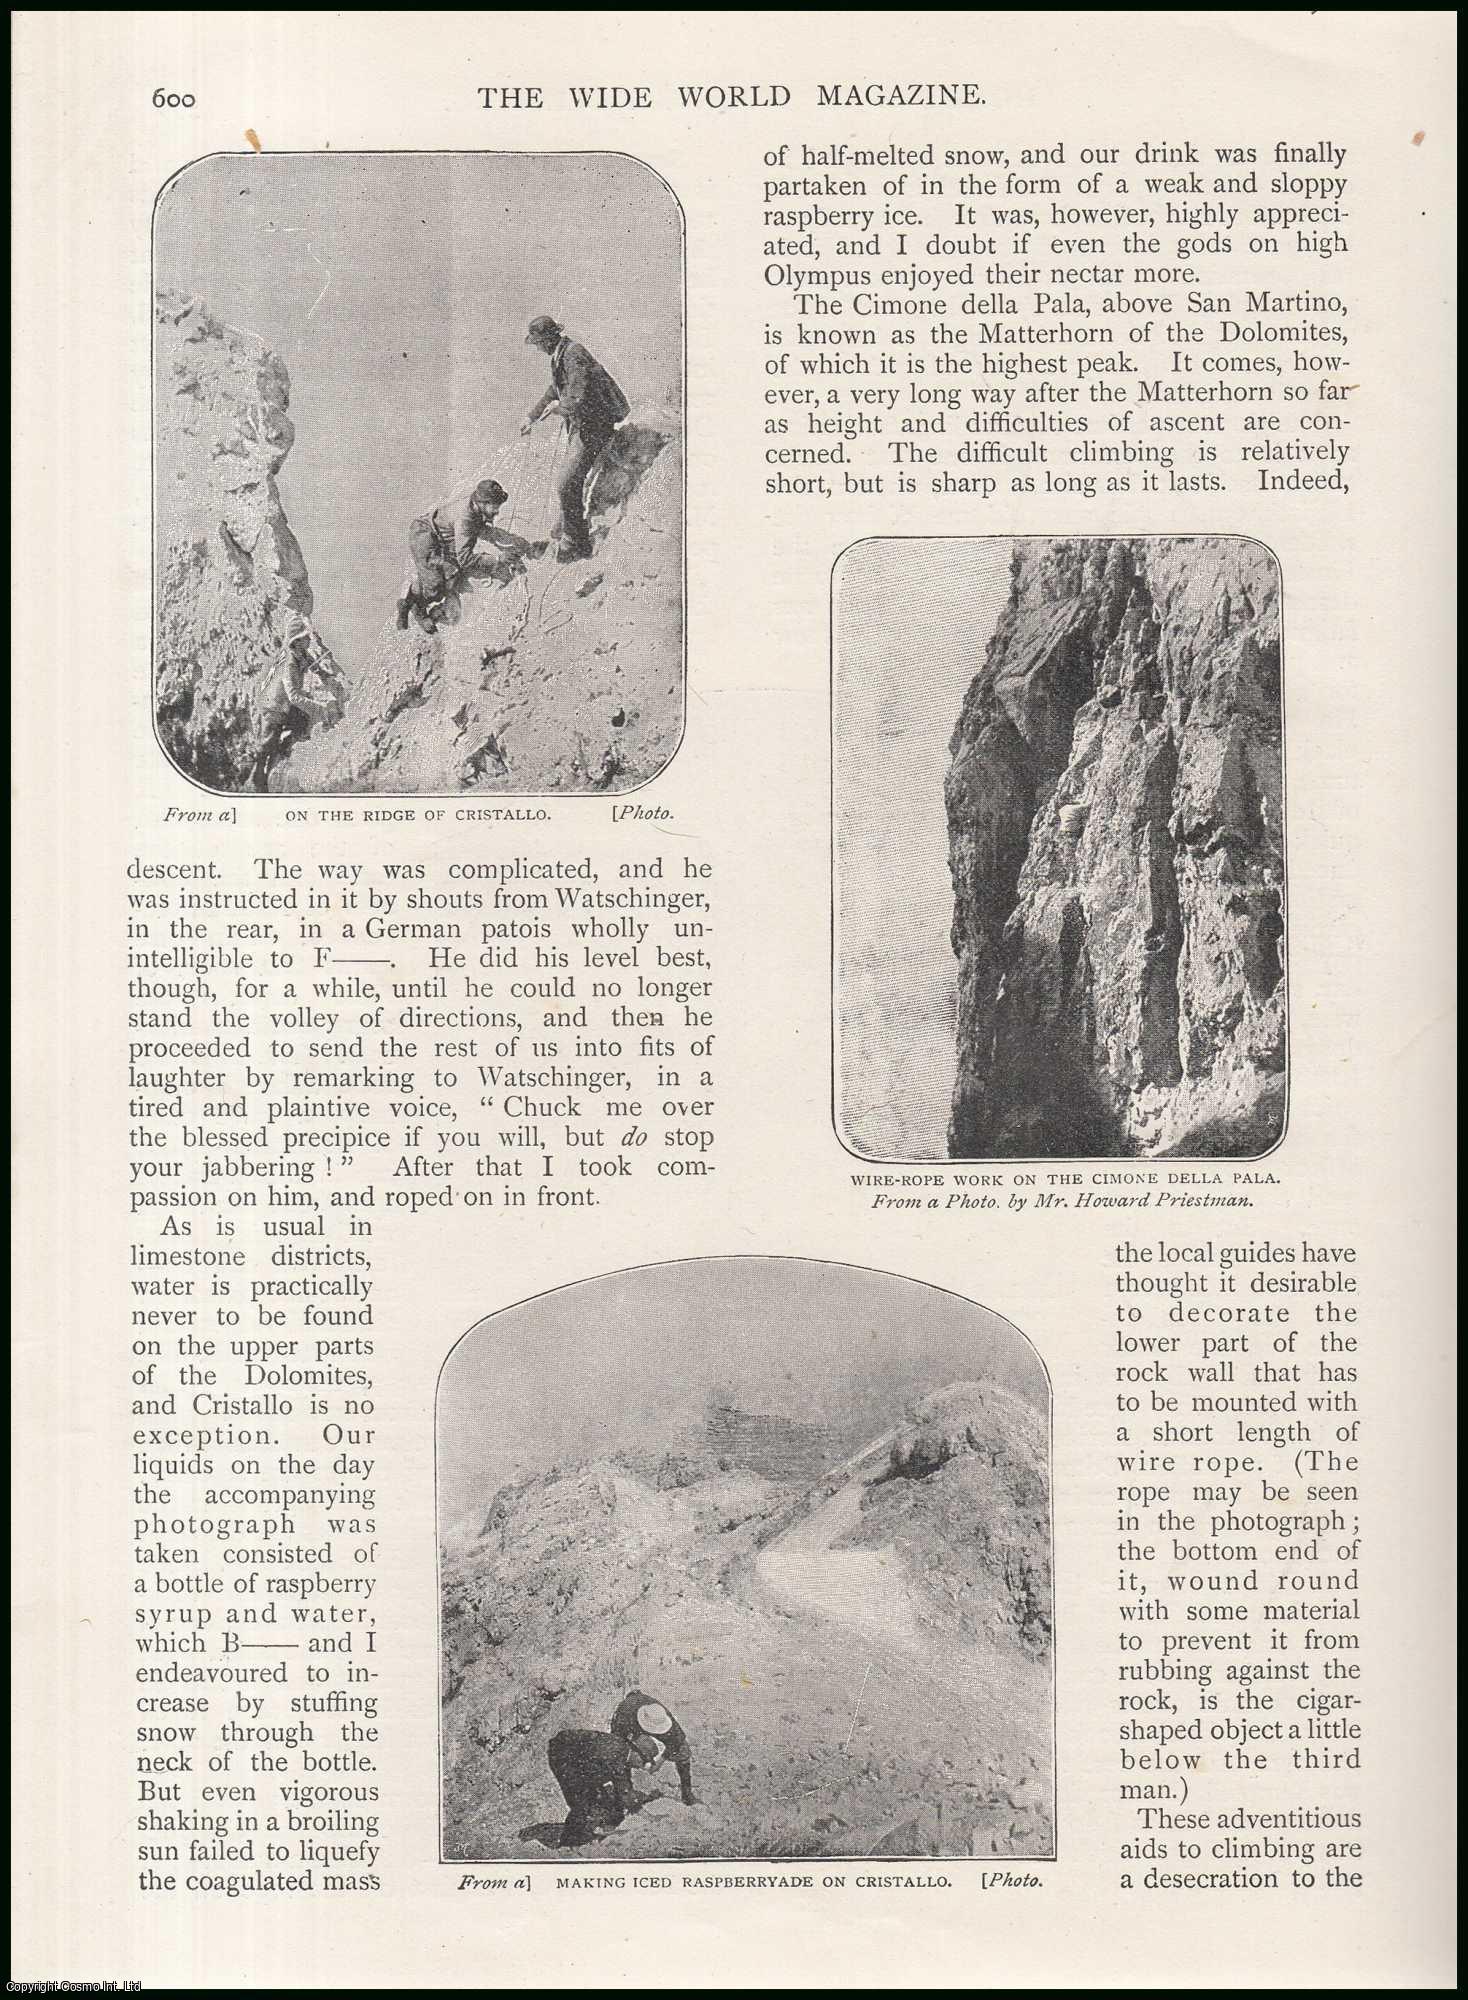 Walter Barrow - Humours of Alpine Mountain Climbing. An uncommon original article from the Wide World Magazine, 1898.